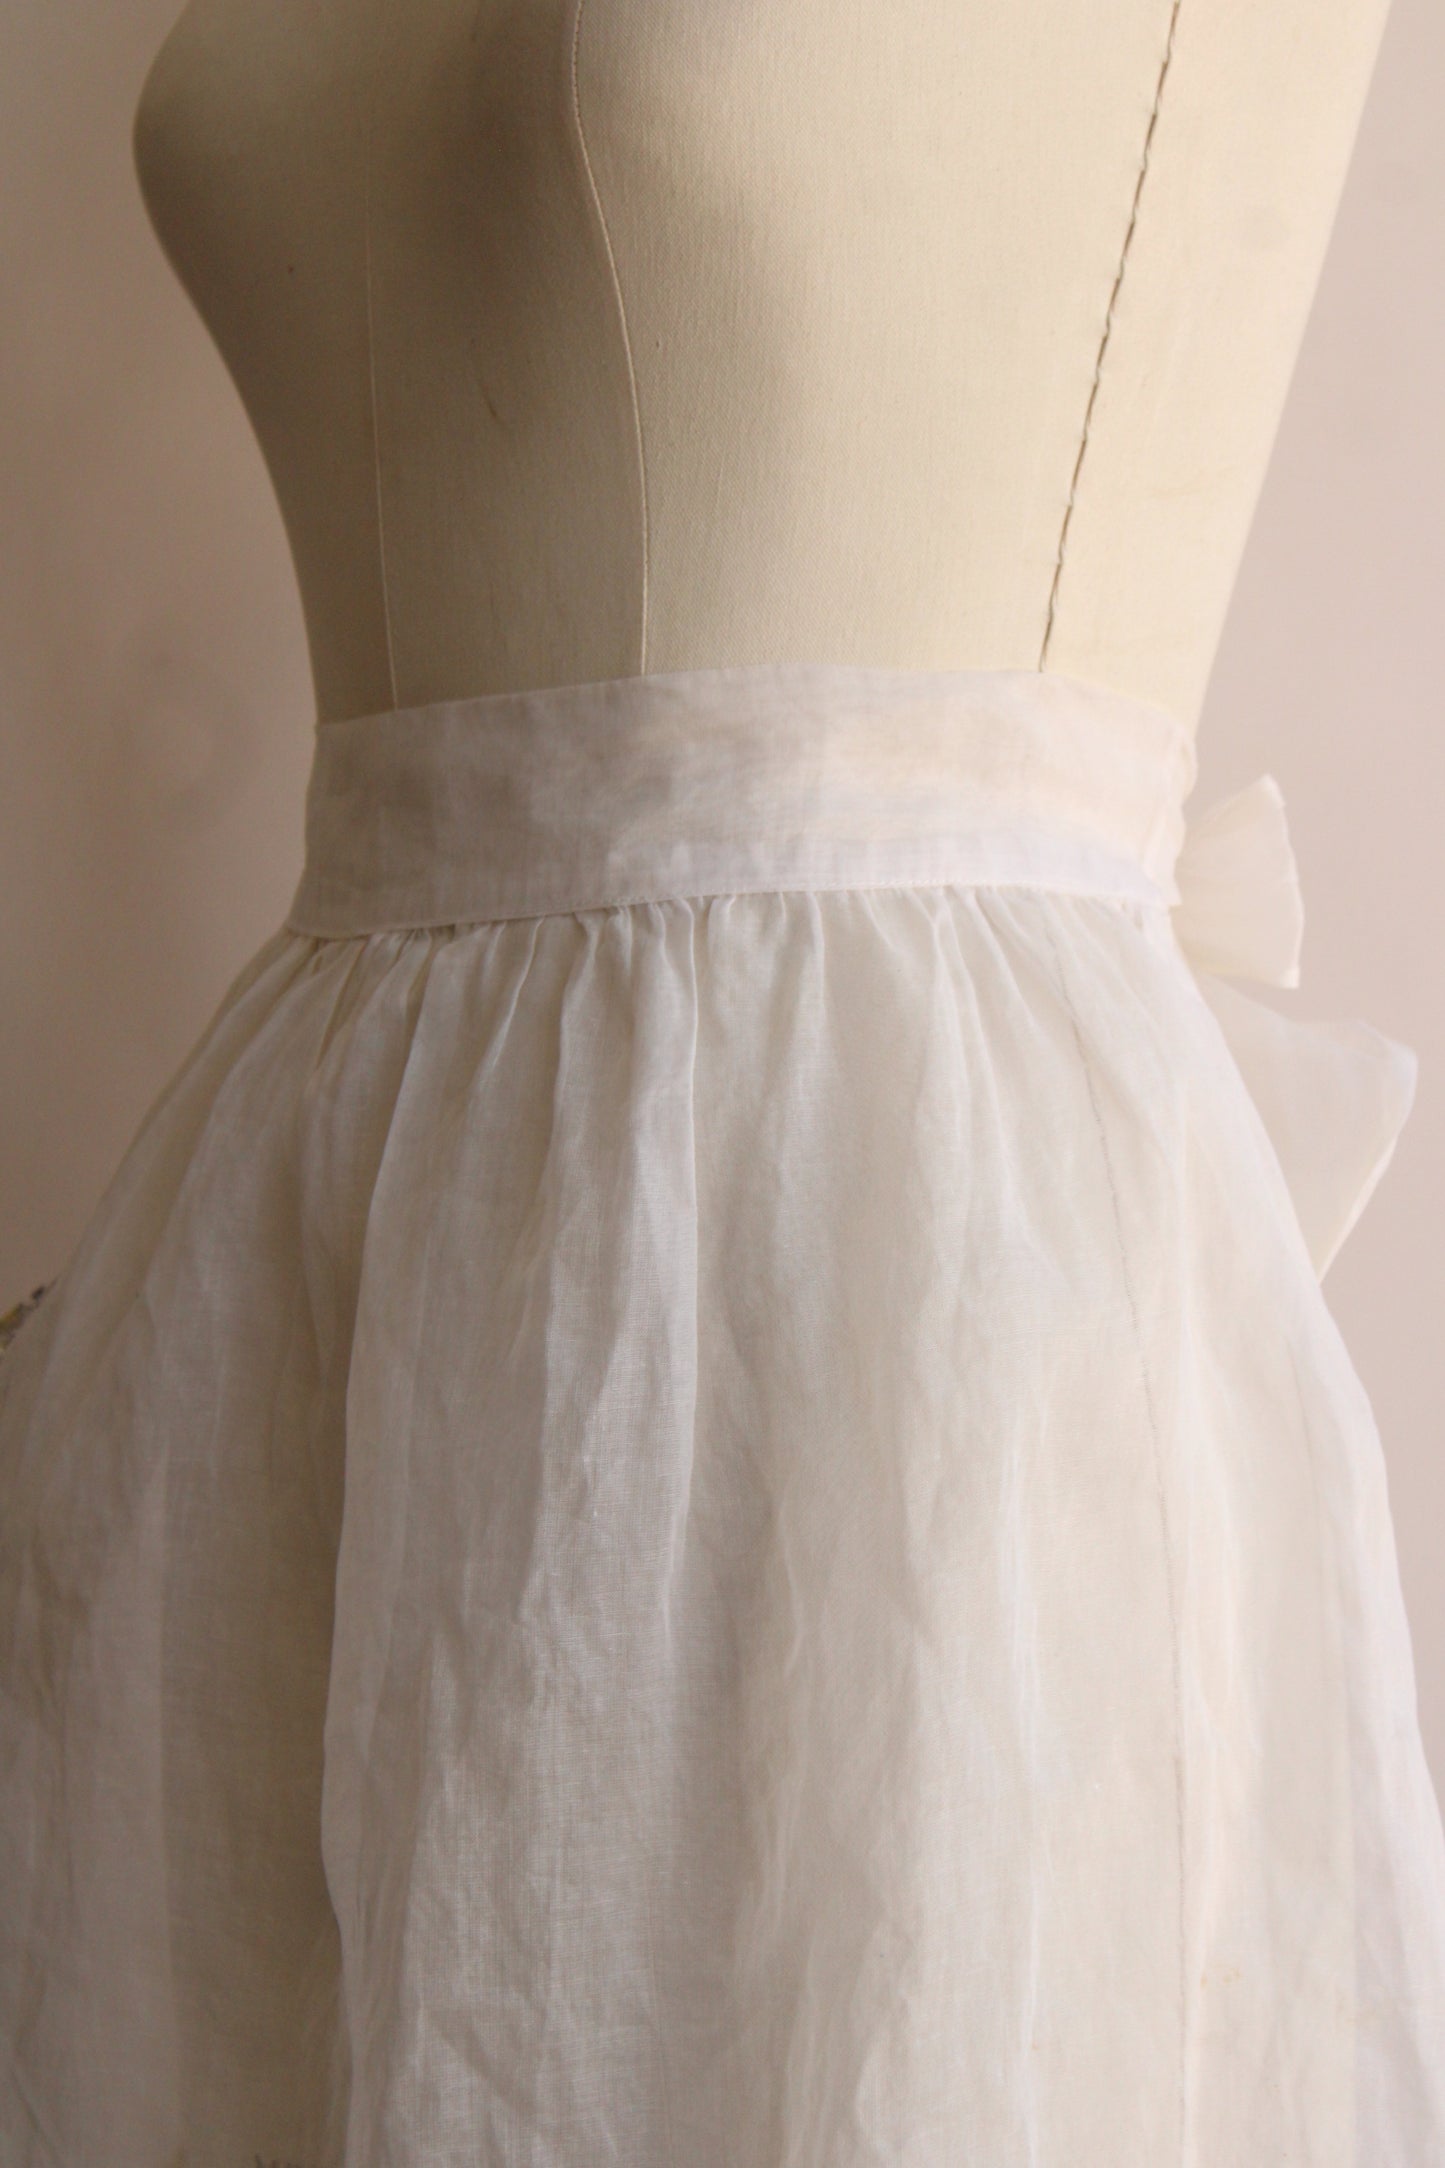 Vintage 1960s Apron with Handkerchief Trim and Pocket